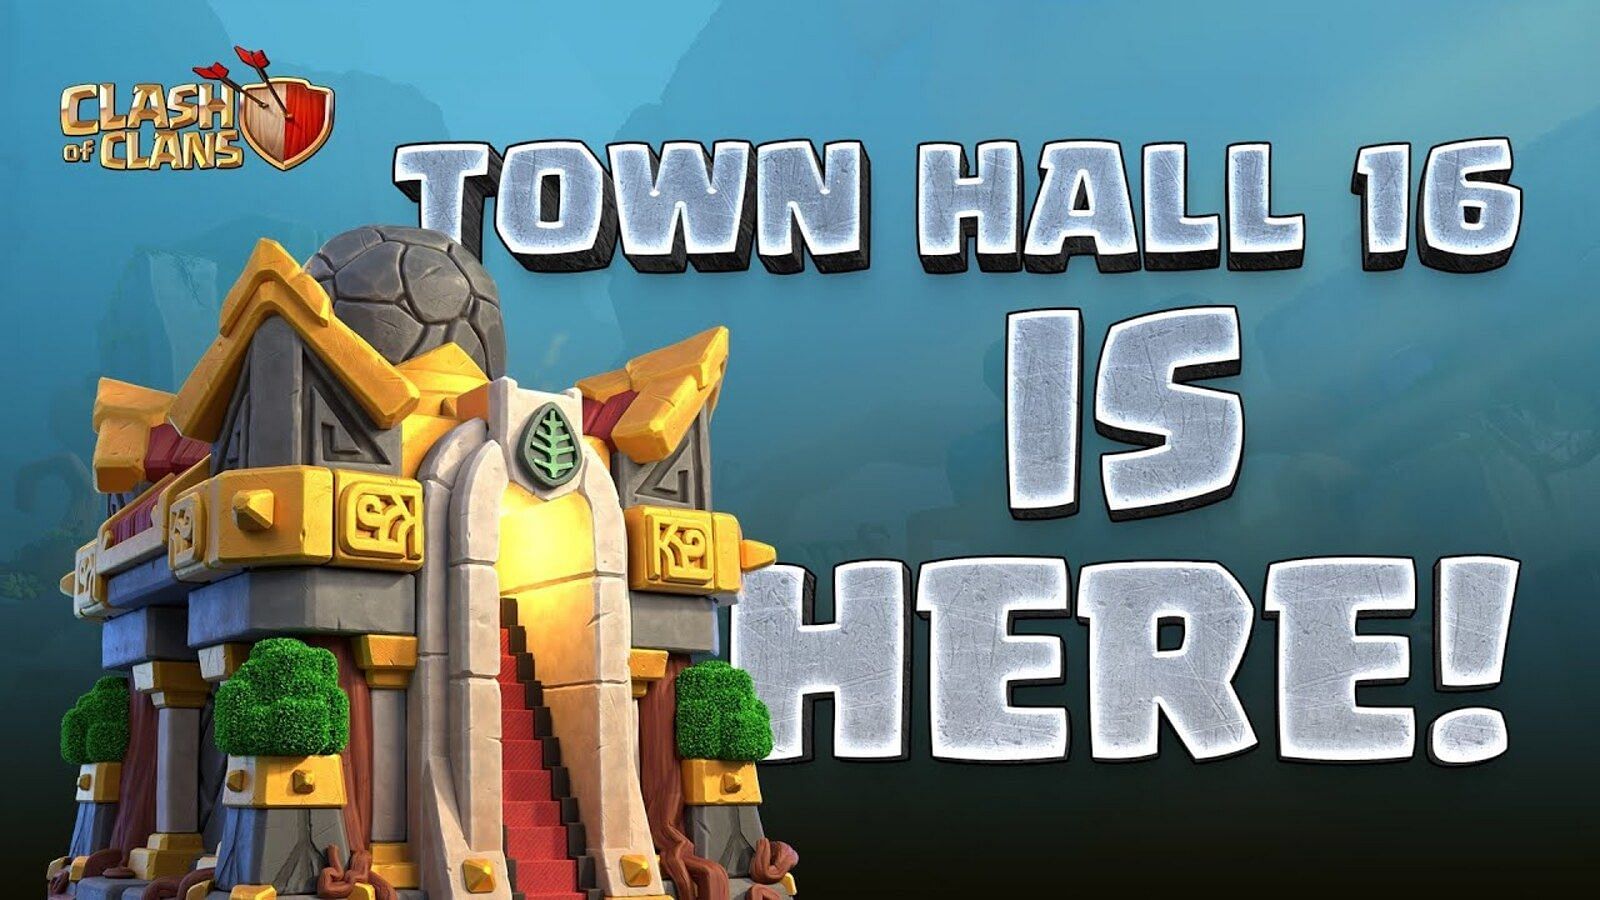 Town Hall 16 in Clash of Clans